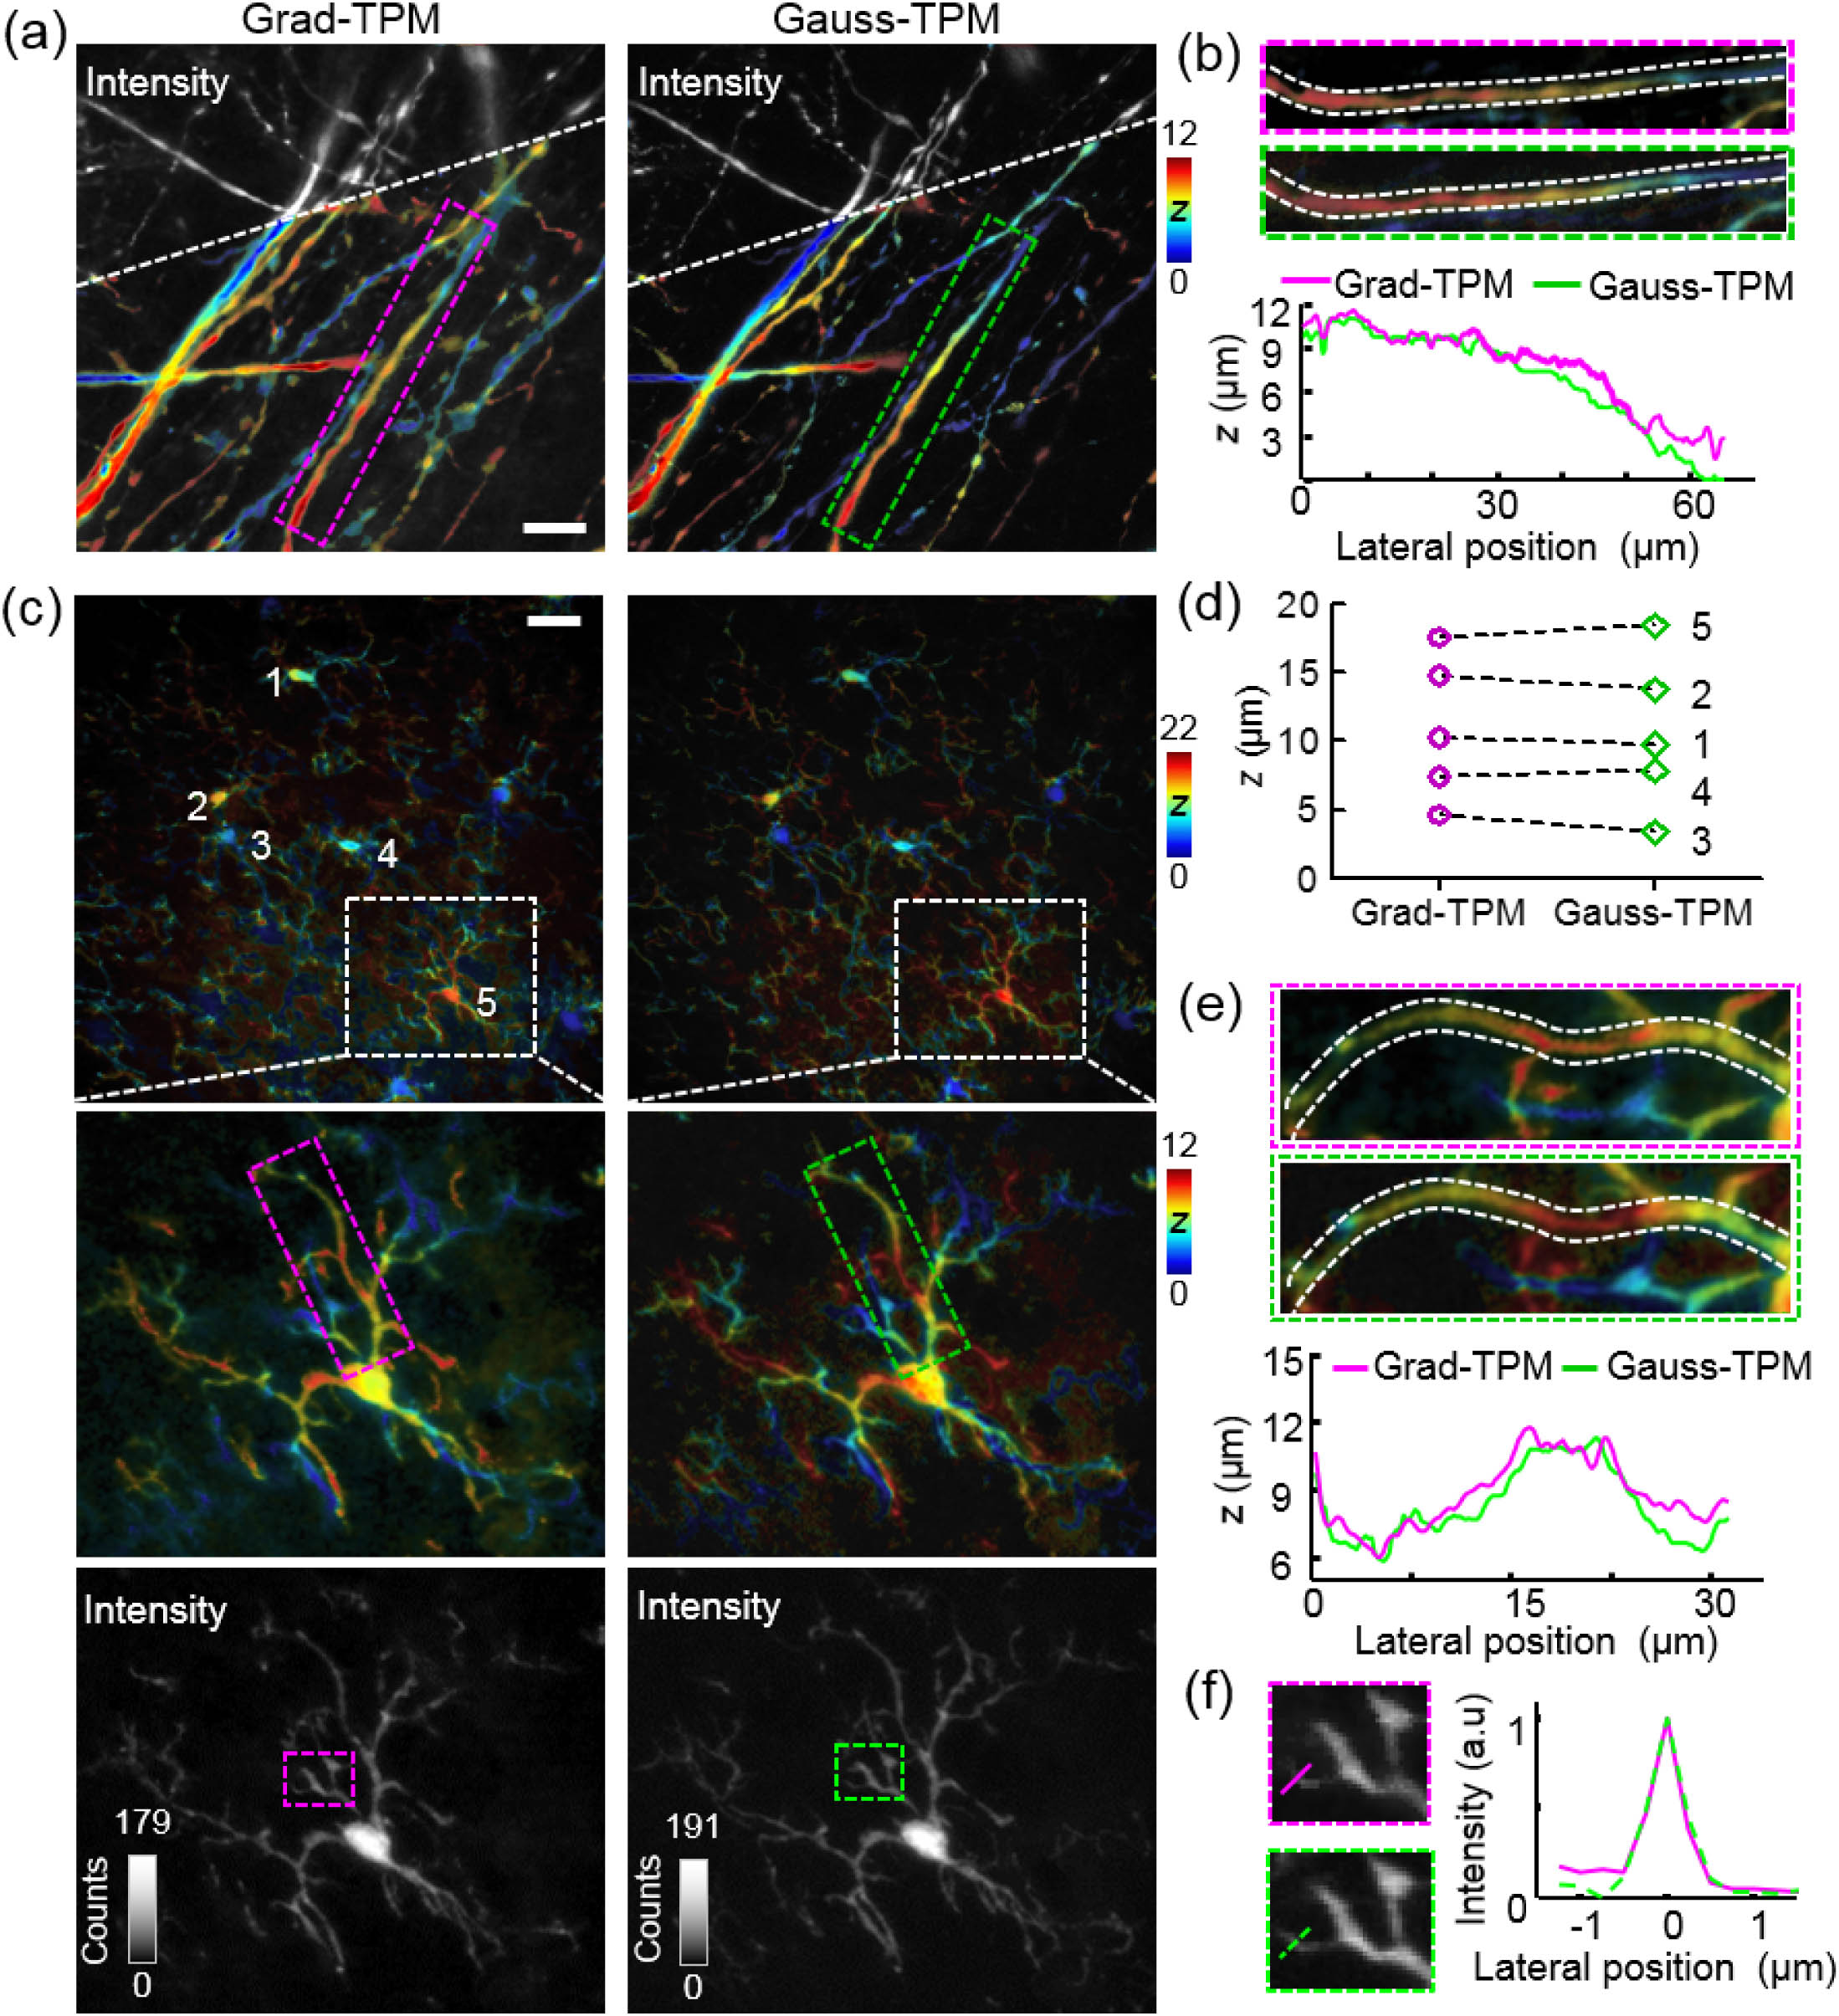 Grad-TPM images of various biological structures show depth resolution and intensity contrast resembling those acquired with Gauss-TPM imaging. (a) Axons in brain slice of Thy1-GFP transgenic mouse. (b) Higher magnification views of boxed axon in (a), and depth profiles along central axis of axon. (c) Microglia in brain slice of CX3CR1-GFP transgenic mouse. First row, stitched images of two axially adjacent volumes (0–22 μm depth); second row, separate images of the upper volume (0–12 μm depth); third row, intensity images corresponding to images in the second row. (d) Depths of microglia cell bodies denoted by 1–5 in images in the first row of (c). (e) Higher magnification views of boxed microglia process in the second row of (c), and depth profiles along central axis. (f) Higher magnification views of boxed areas in the third row of (c) and corresponding intensity profiles along dashed lines for lateral resolution demonstration. Scale bars, 20 μm. Units of z, μm.